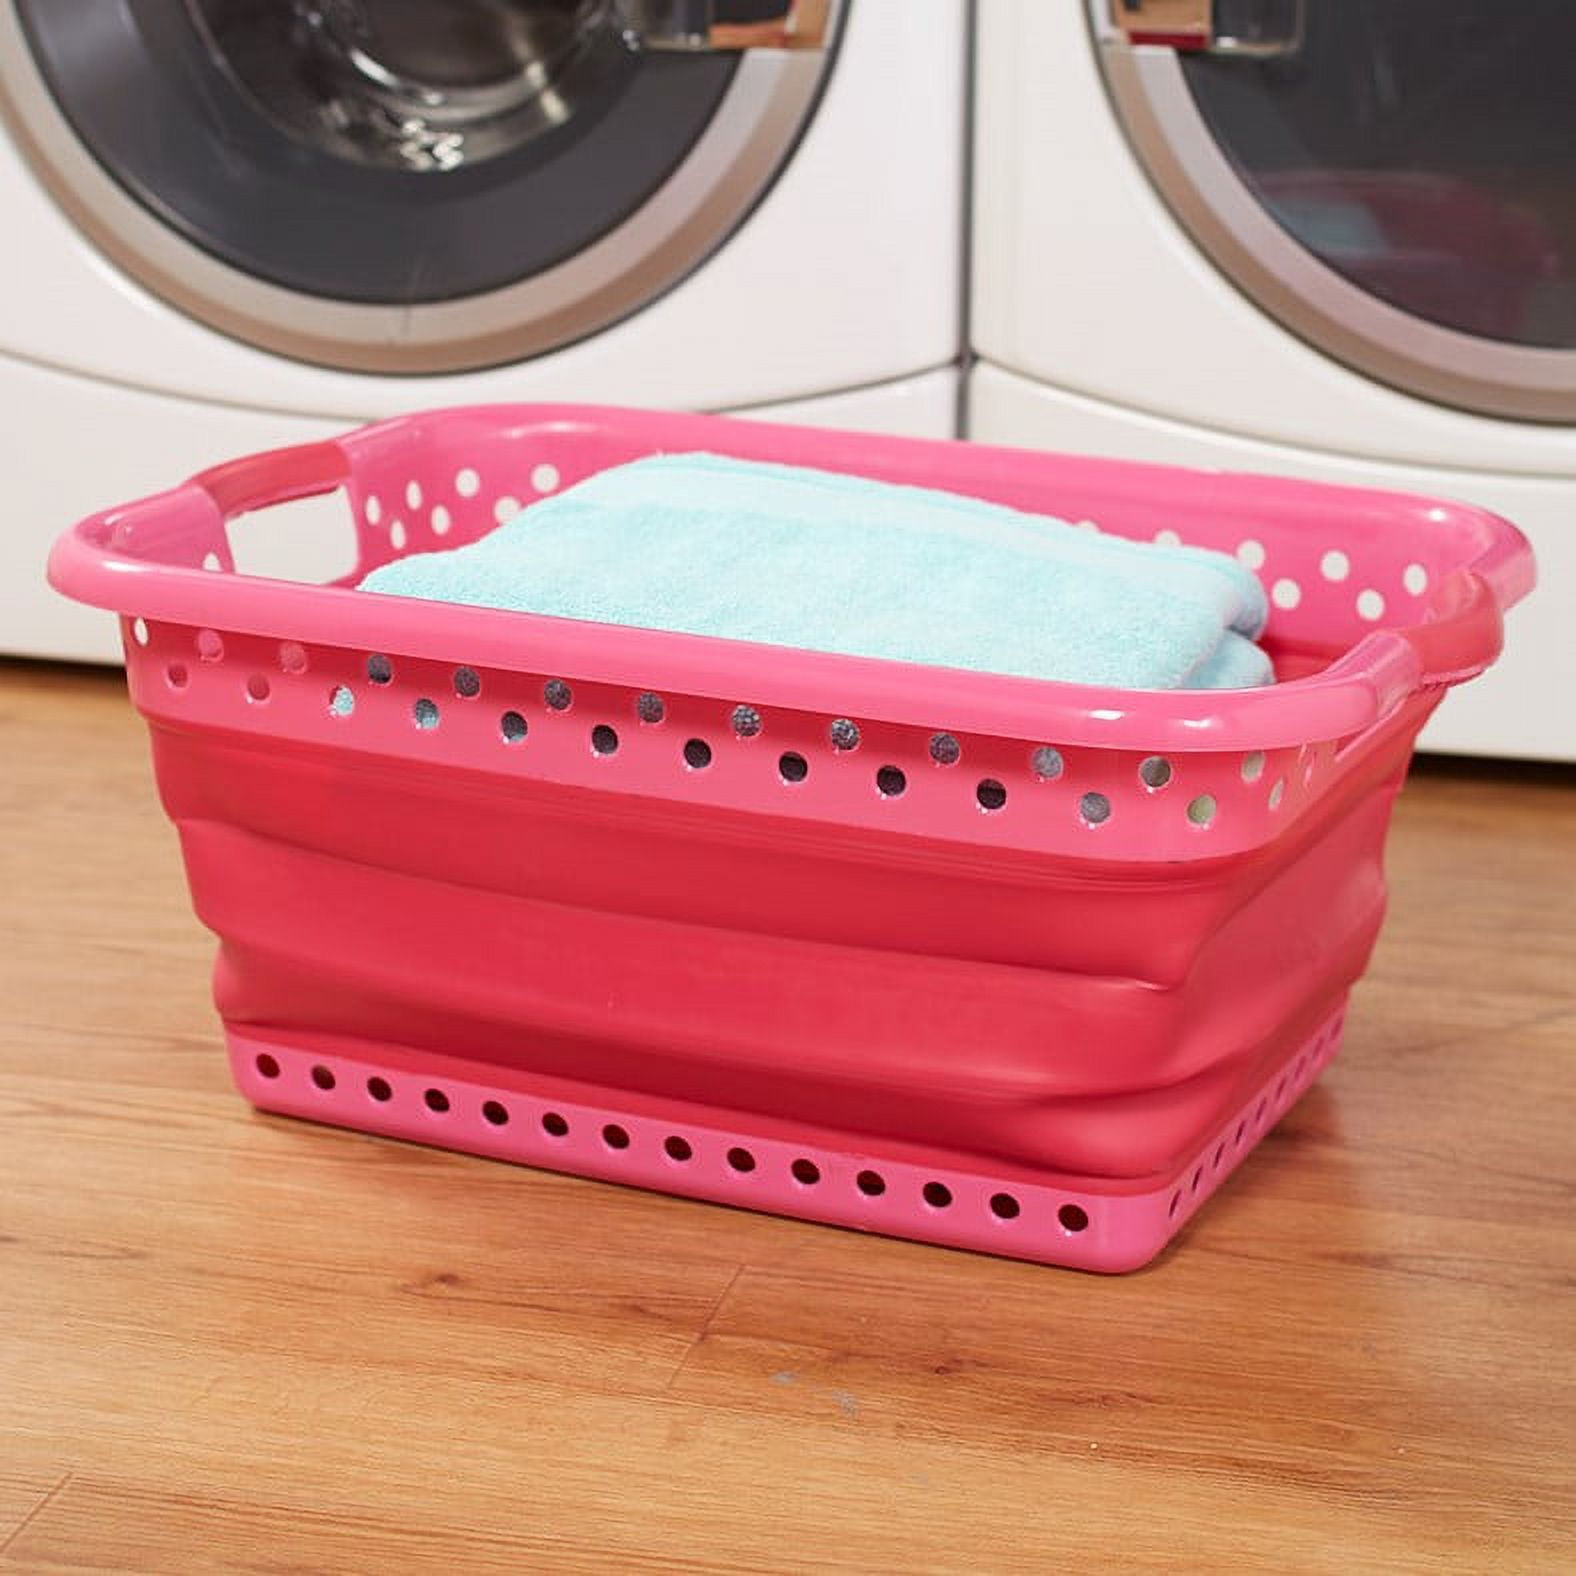  Laundry Turtle™ Large Collapsible Laundry Basket -  Revolutionary Foldable Laundry Hamper - Innovative Laundry Basket for Dirty  Clothes Washing & Dryer Removal Collapsing Portable Laundry Grabber : Home  & Kitchen